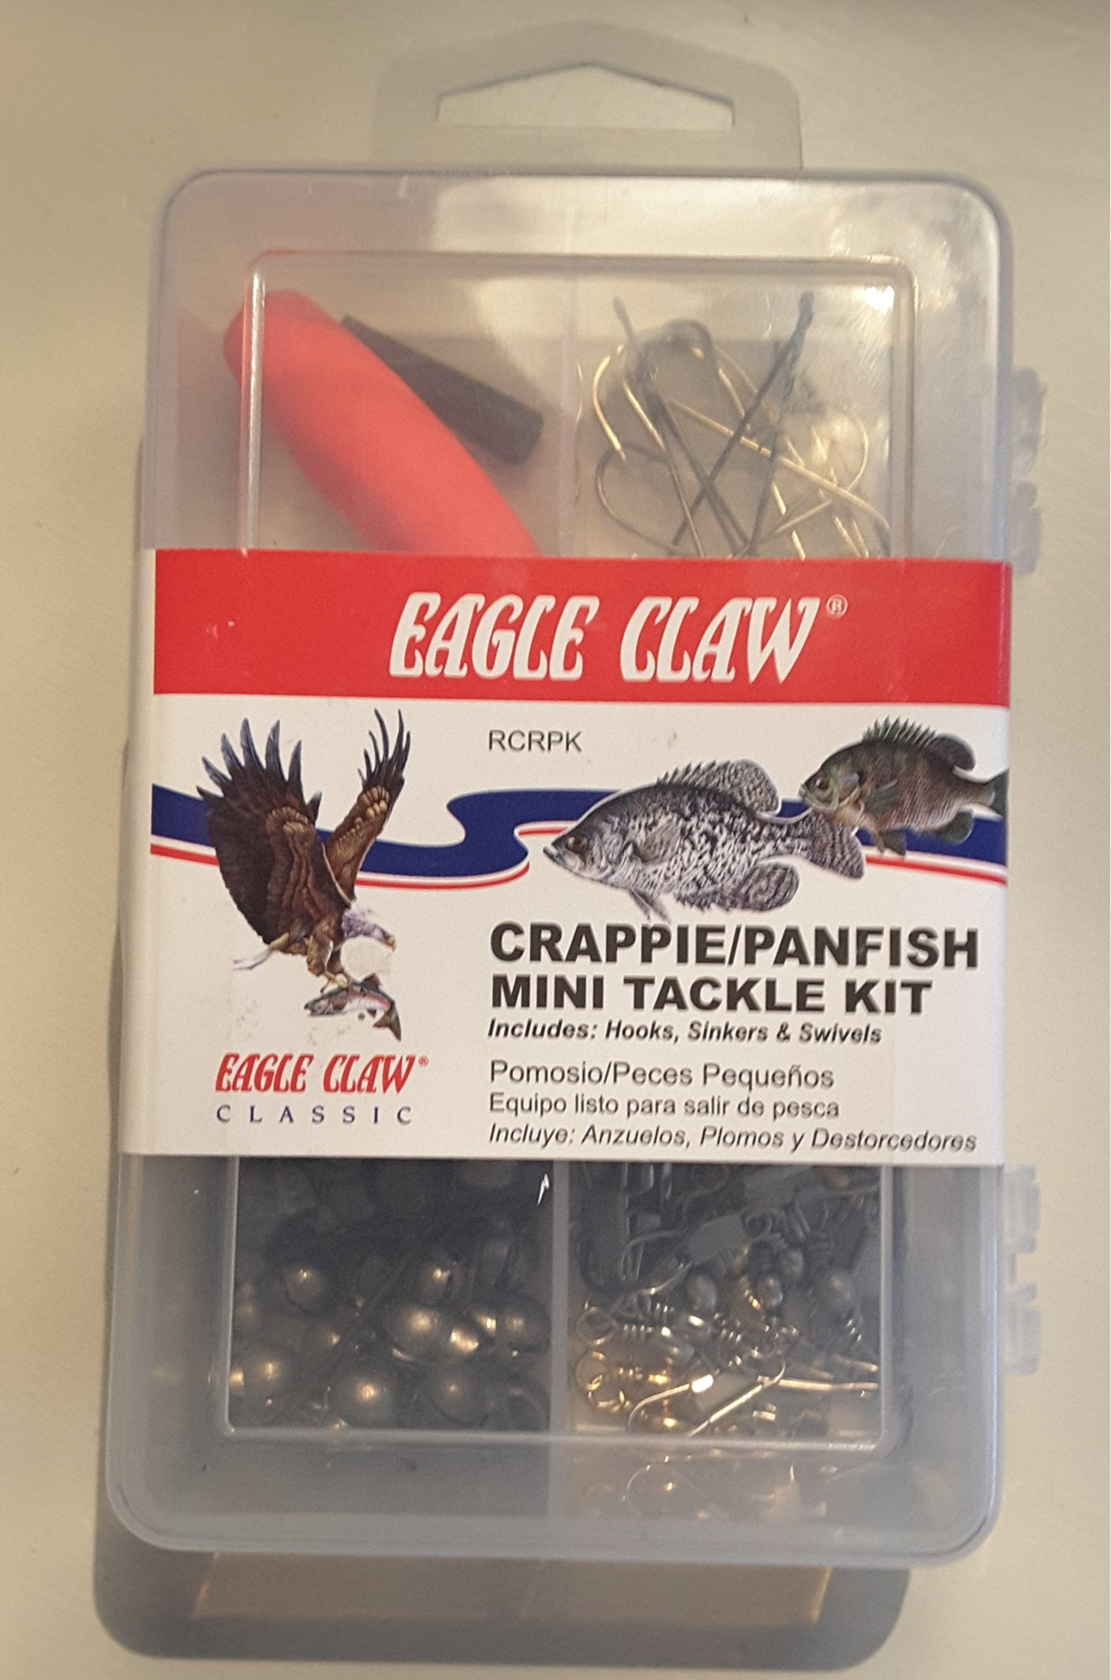 Eagle Claw Crappie/Panfish Mini Tackle Kit, 85 piece.